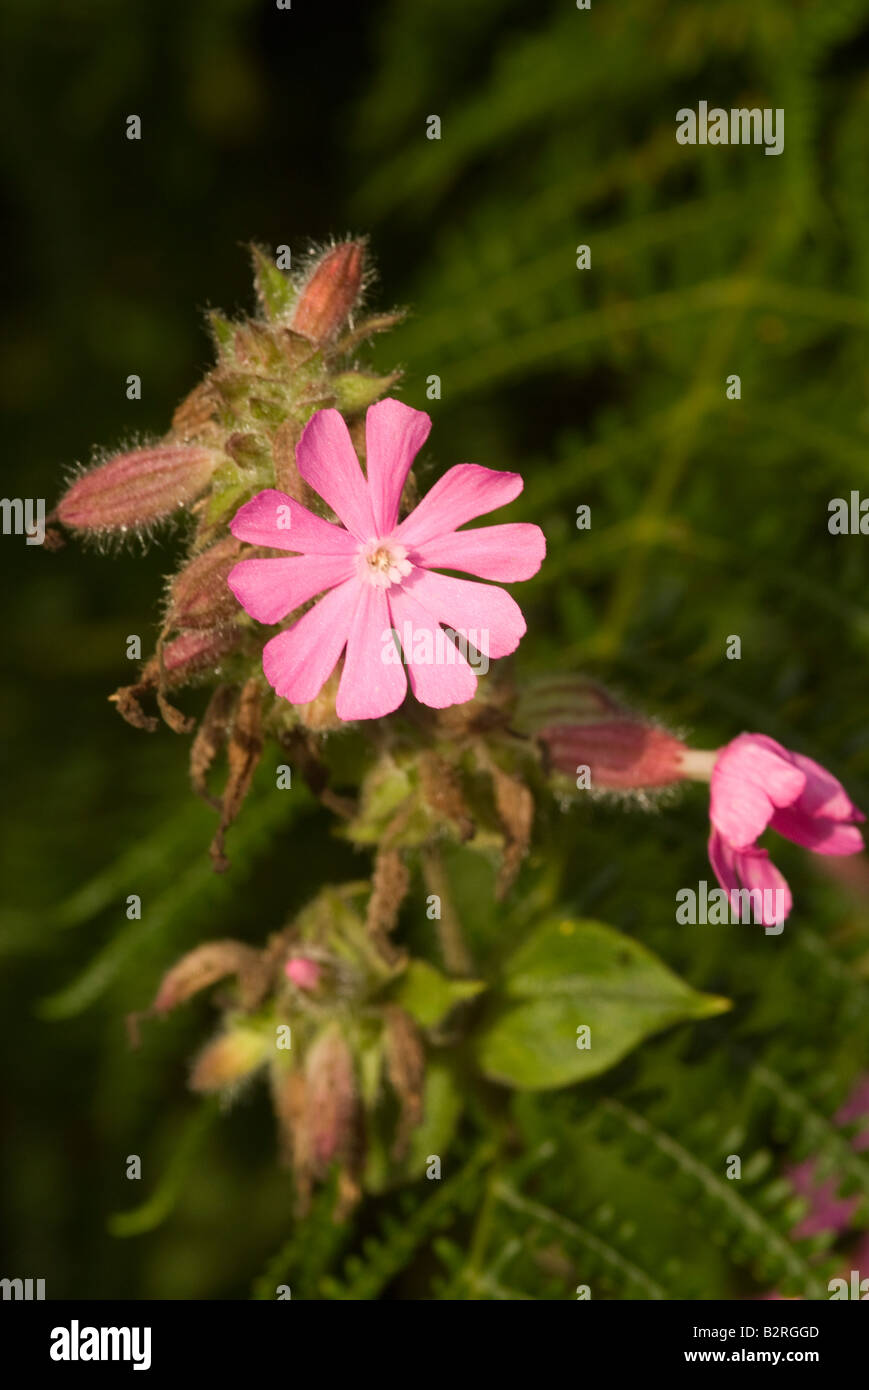 A Clump of Wild Red Campion Flowers in a Hedgerow near Carrick Dumfries and Galloway Scotland United Kingdom Stock Photo